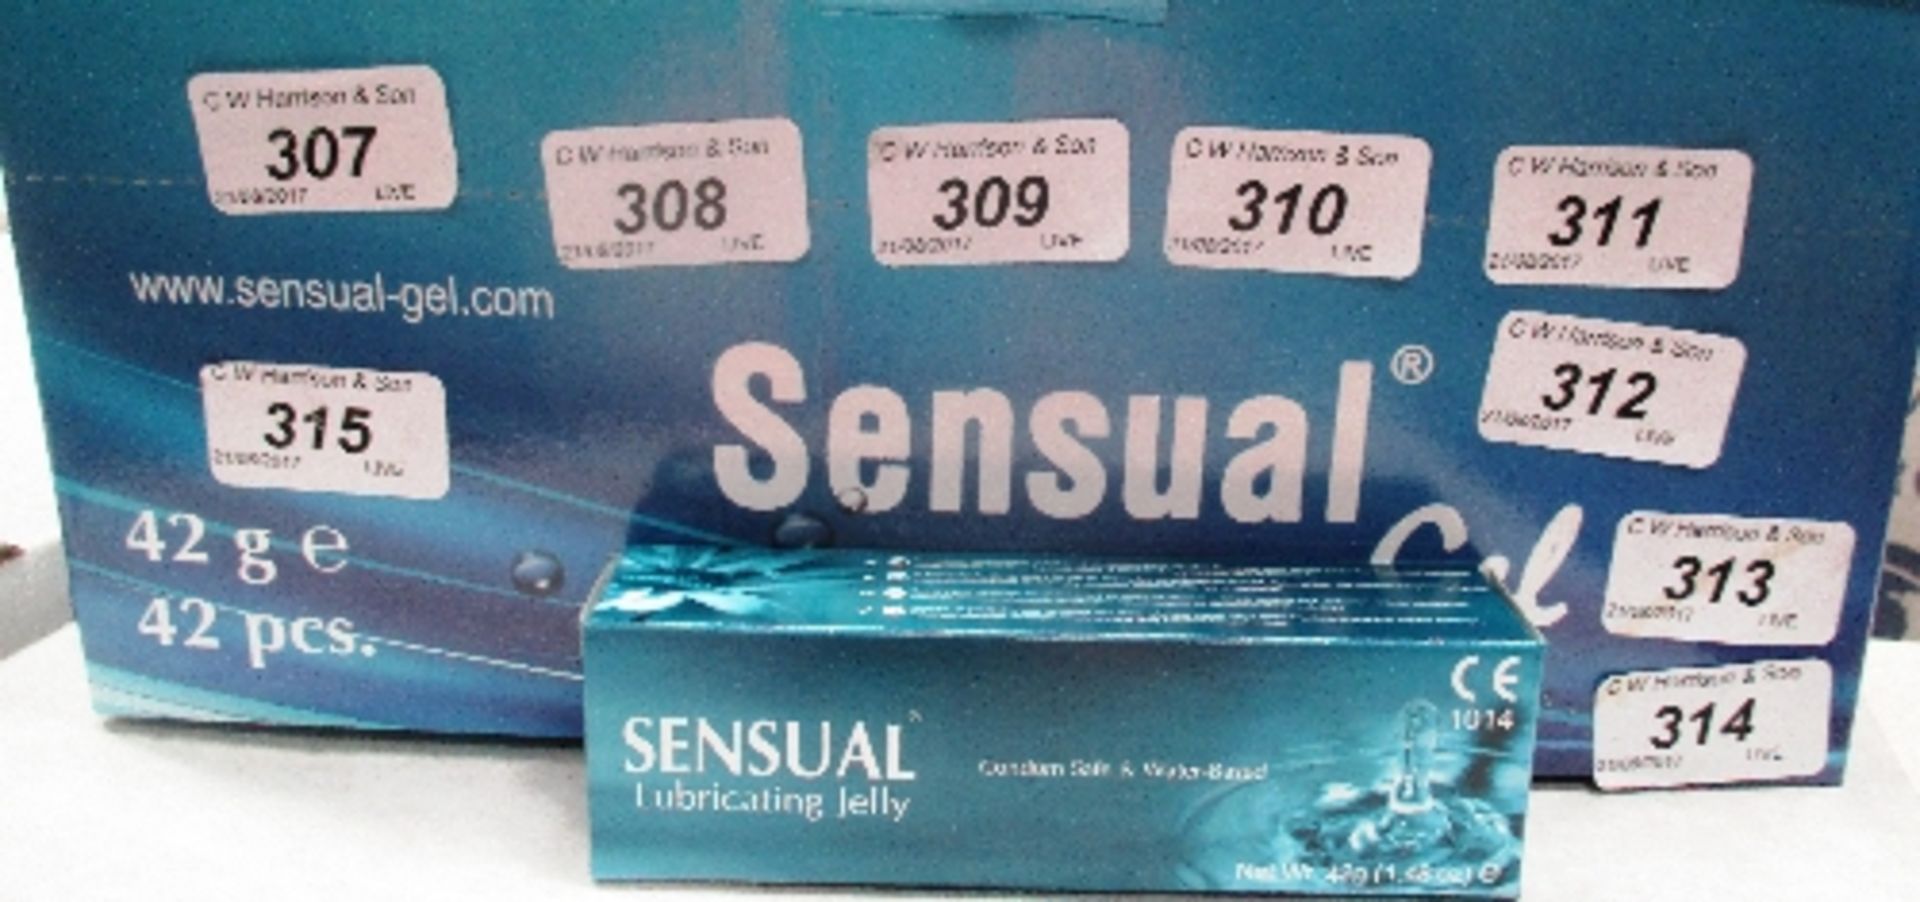 168 x 42g tubes of condom safe and water based Sensual lubricating jelly (1 outer box)